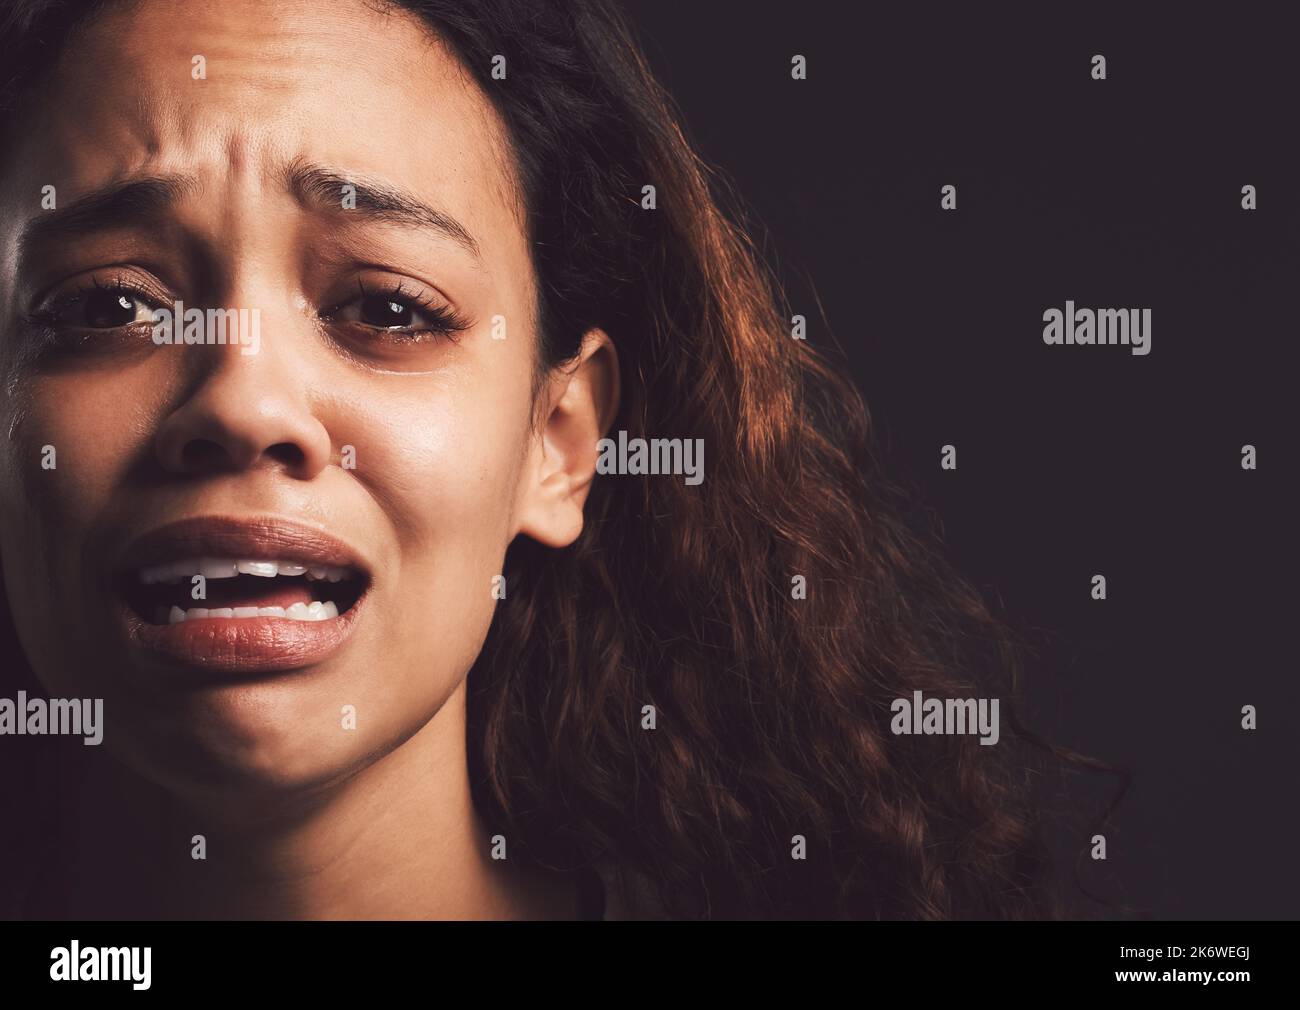 My dark days made me strong. a young woman crying against a black background. Stock Photo